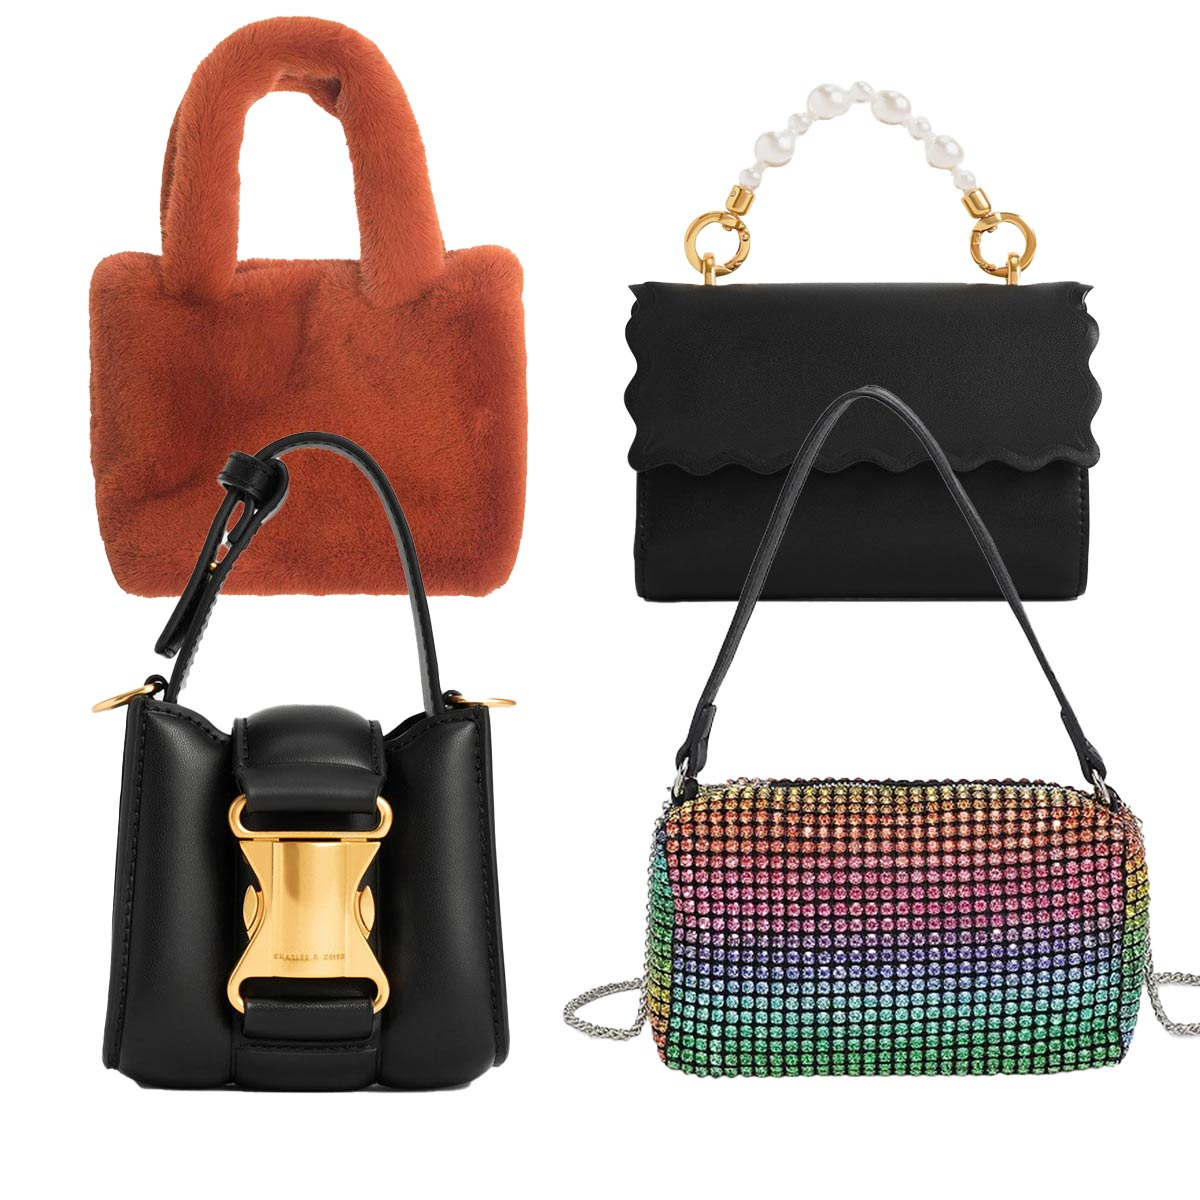 MICRO & MINI BAGS WORTH BUYING, FULL REVIEW, LUXURY & AFFORDABLE